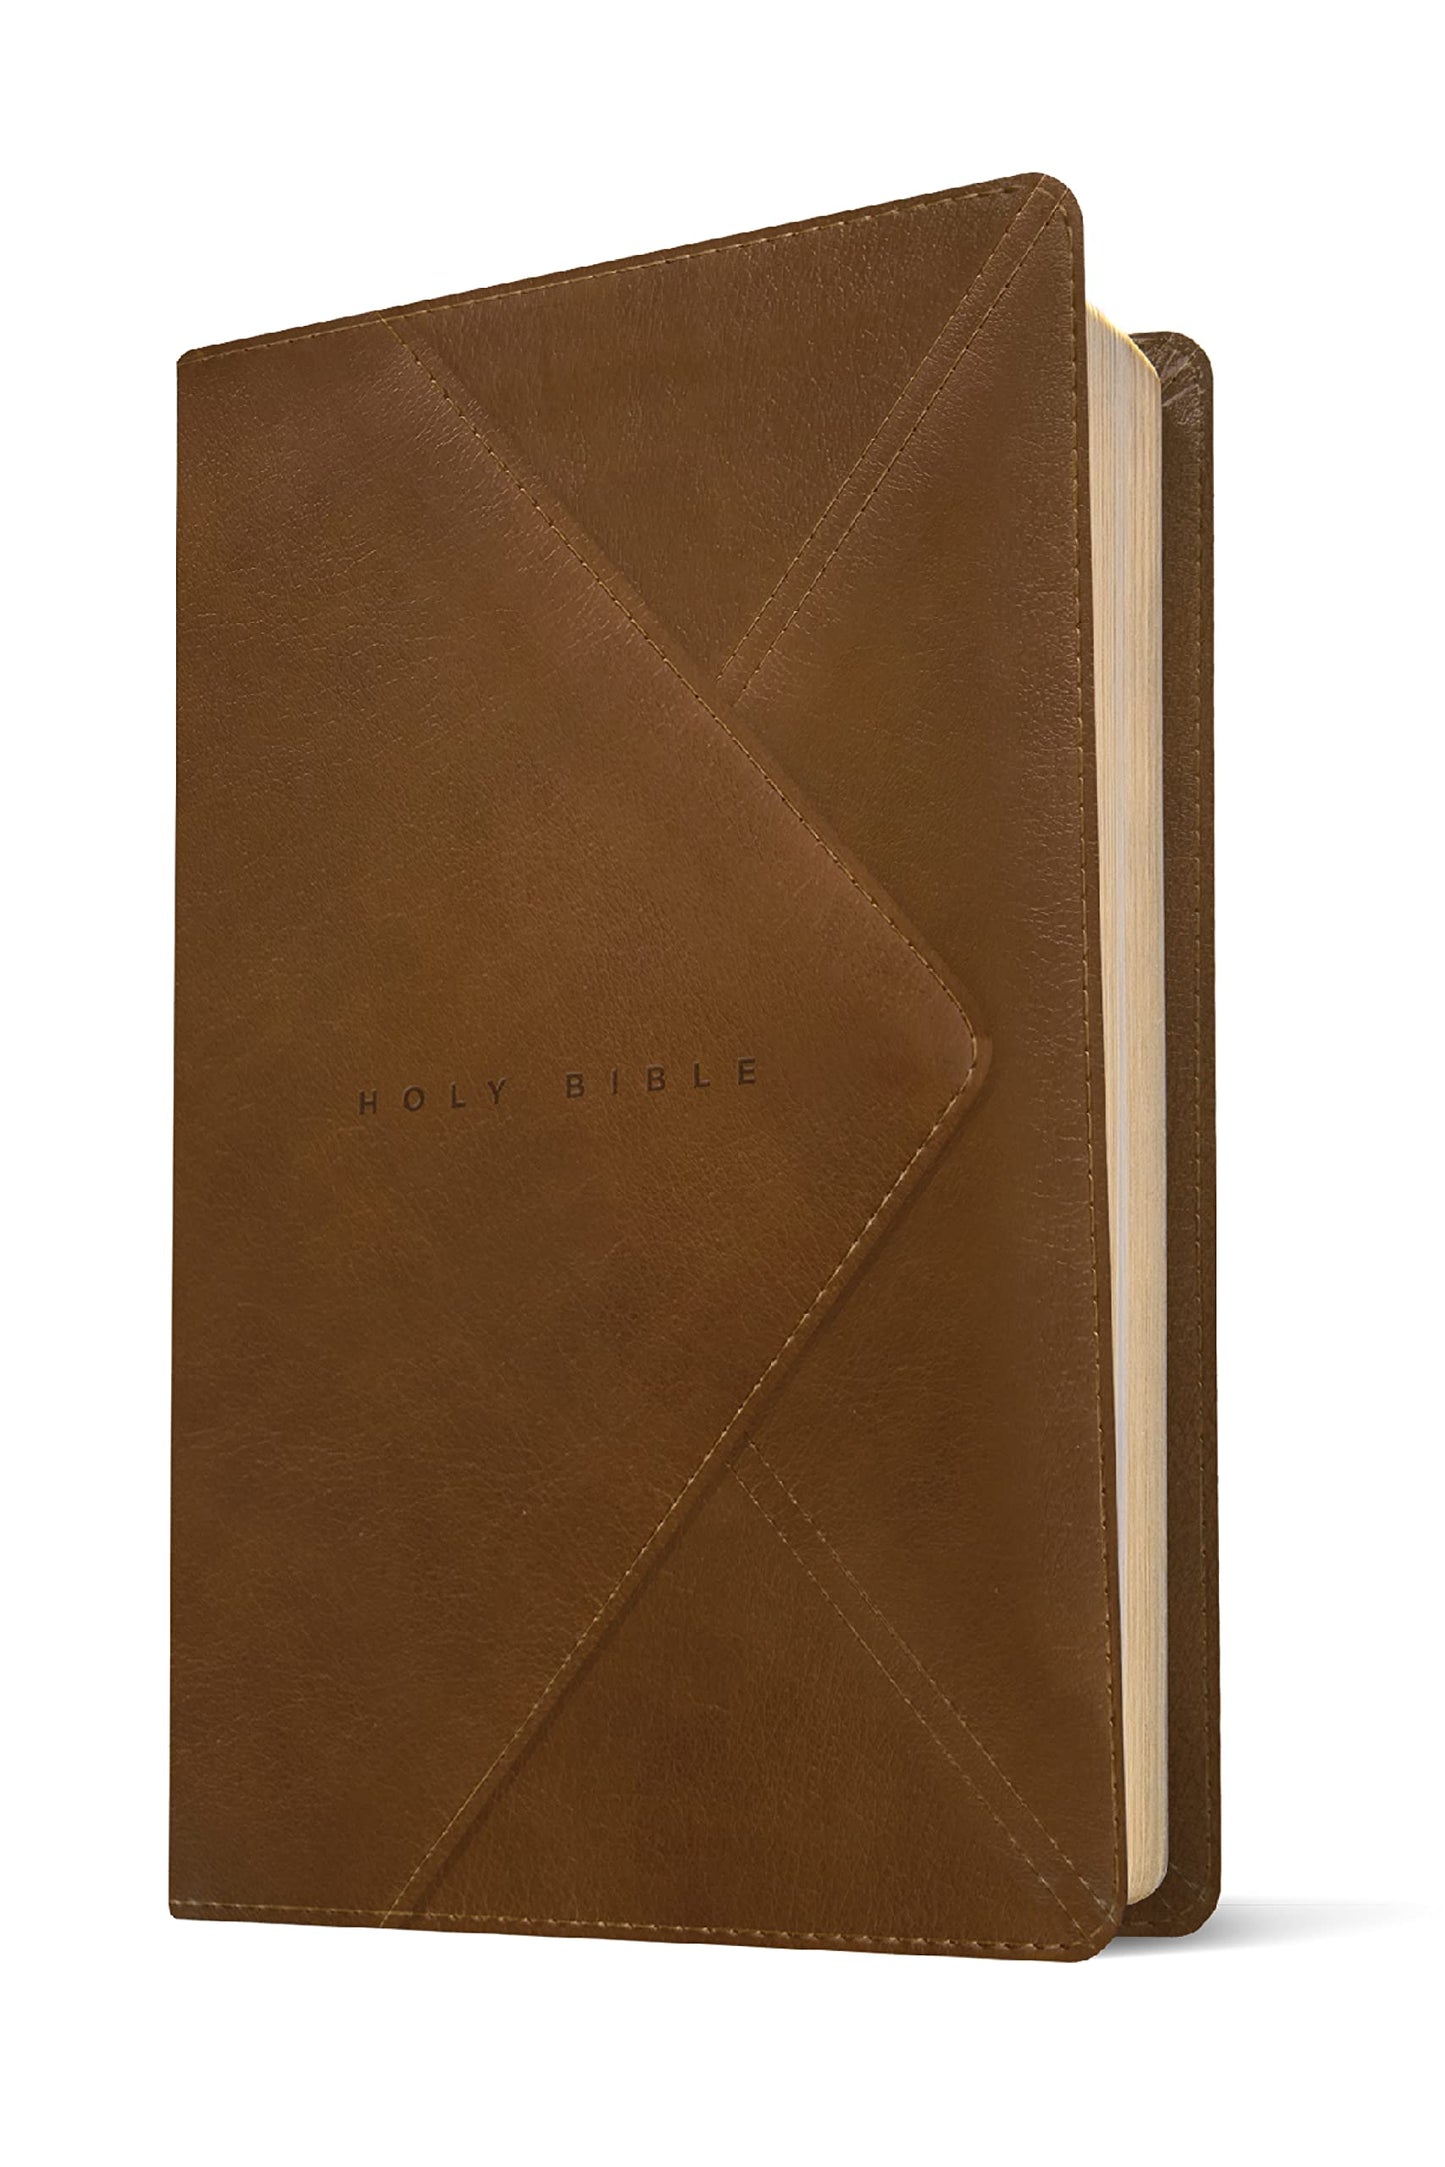 NLT Thinline Reference Bible, Filament Enabled Edition (LeatherLike, Messenger Brown)